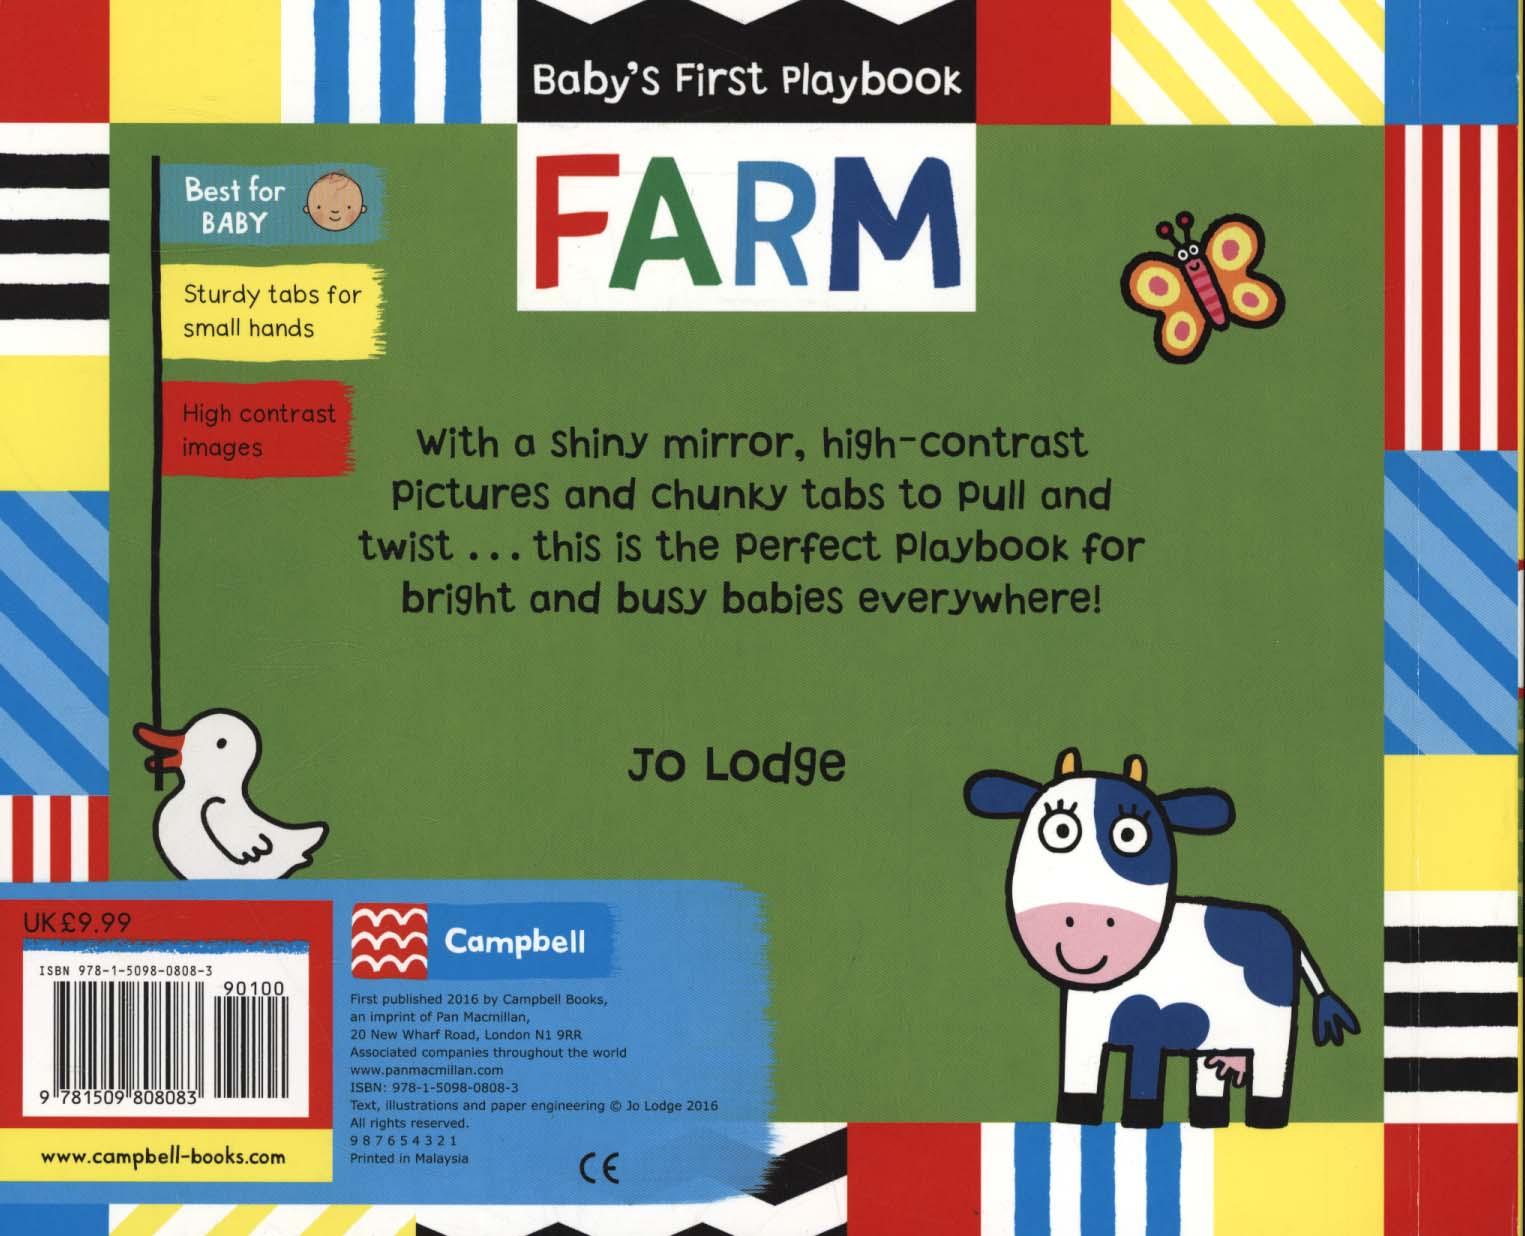 Baby's First Playbook: Farm